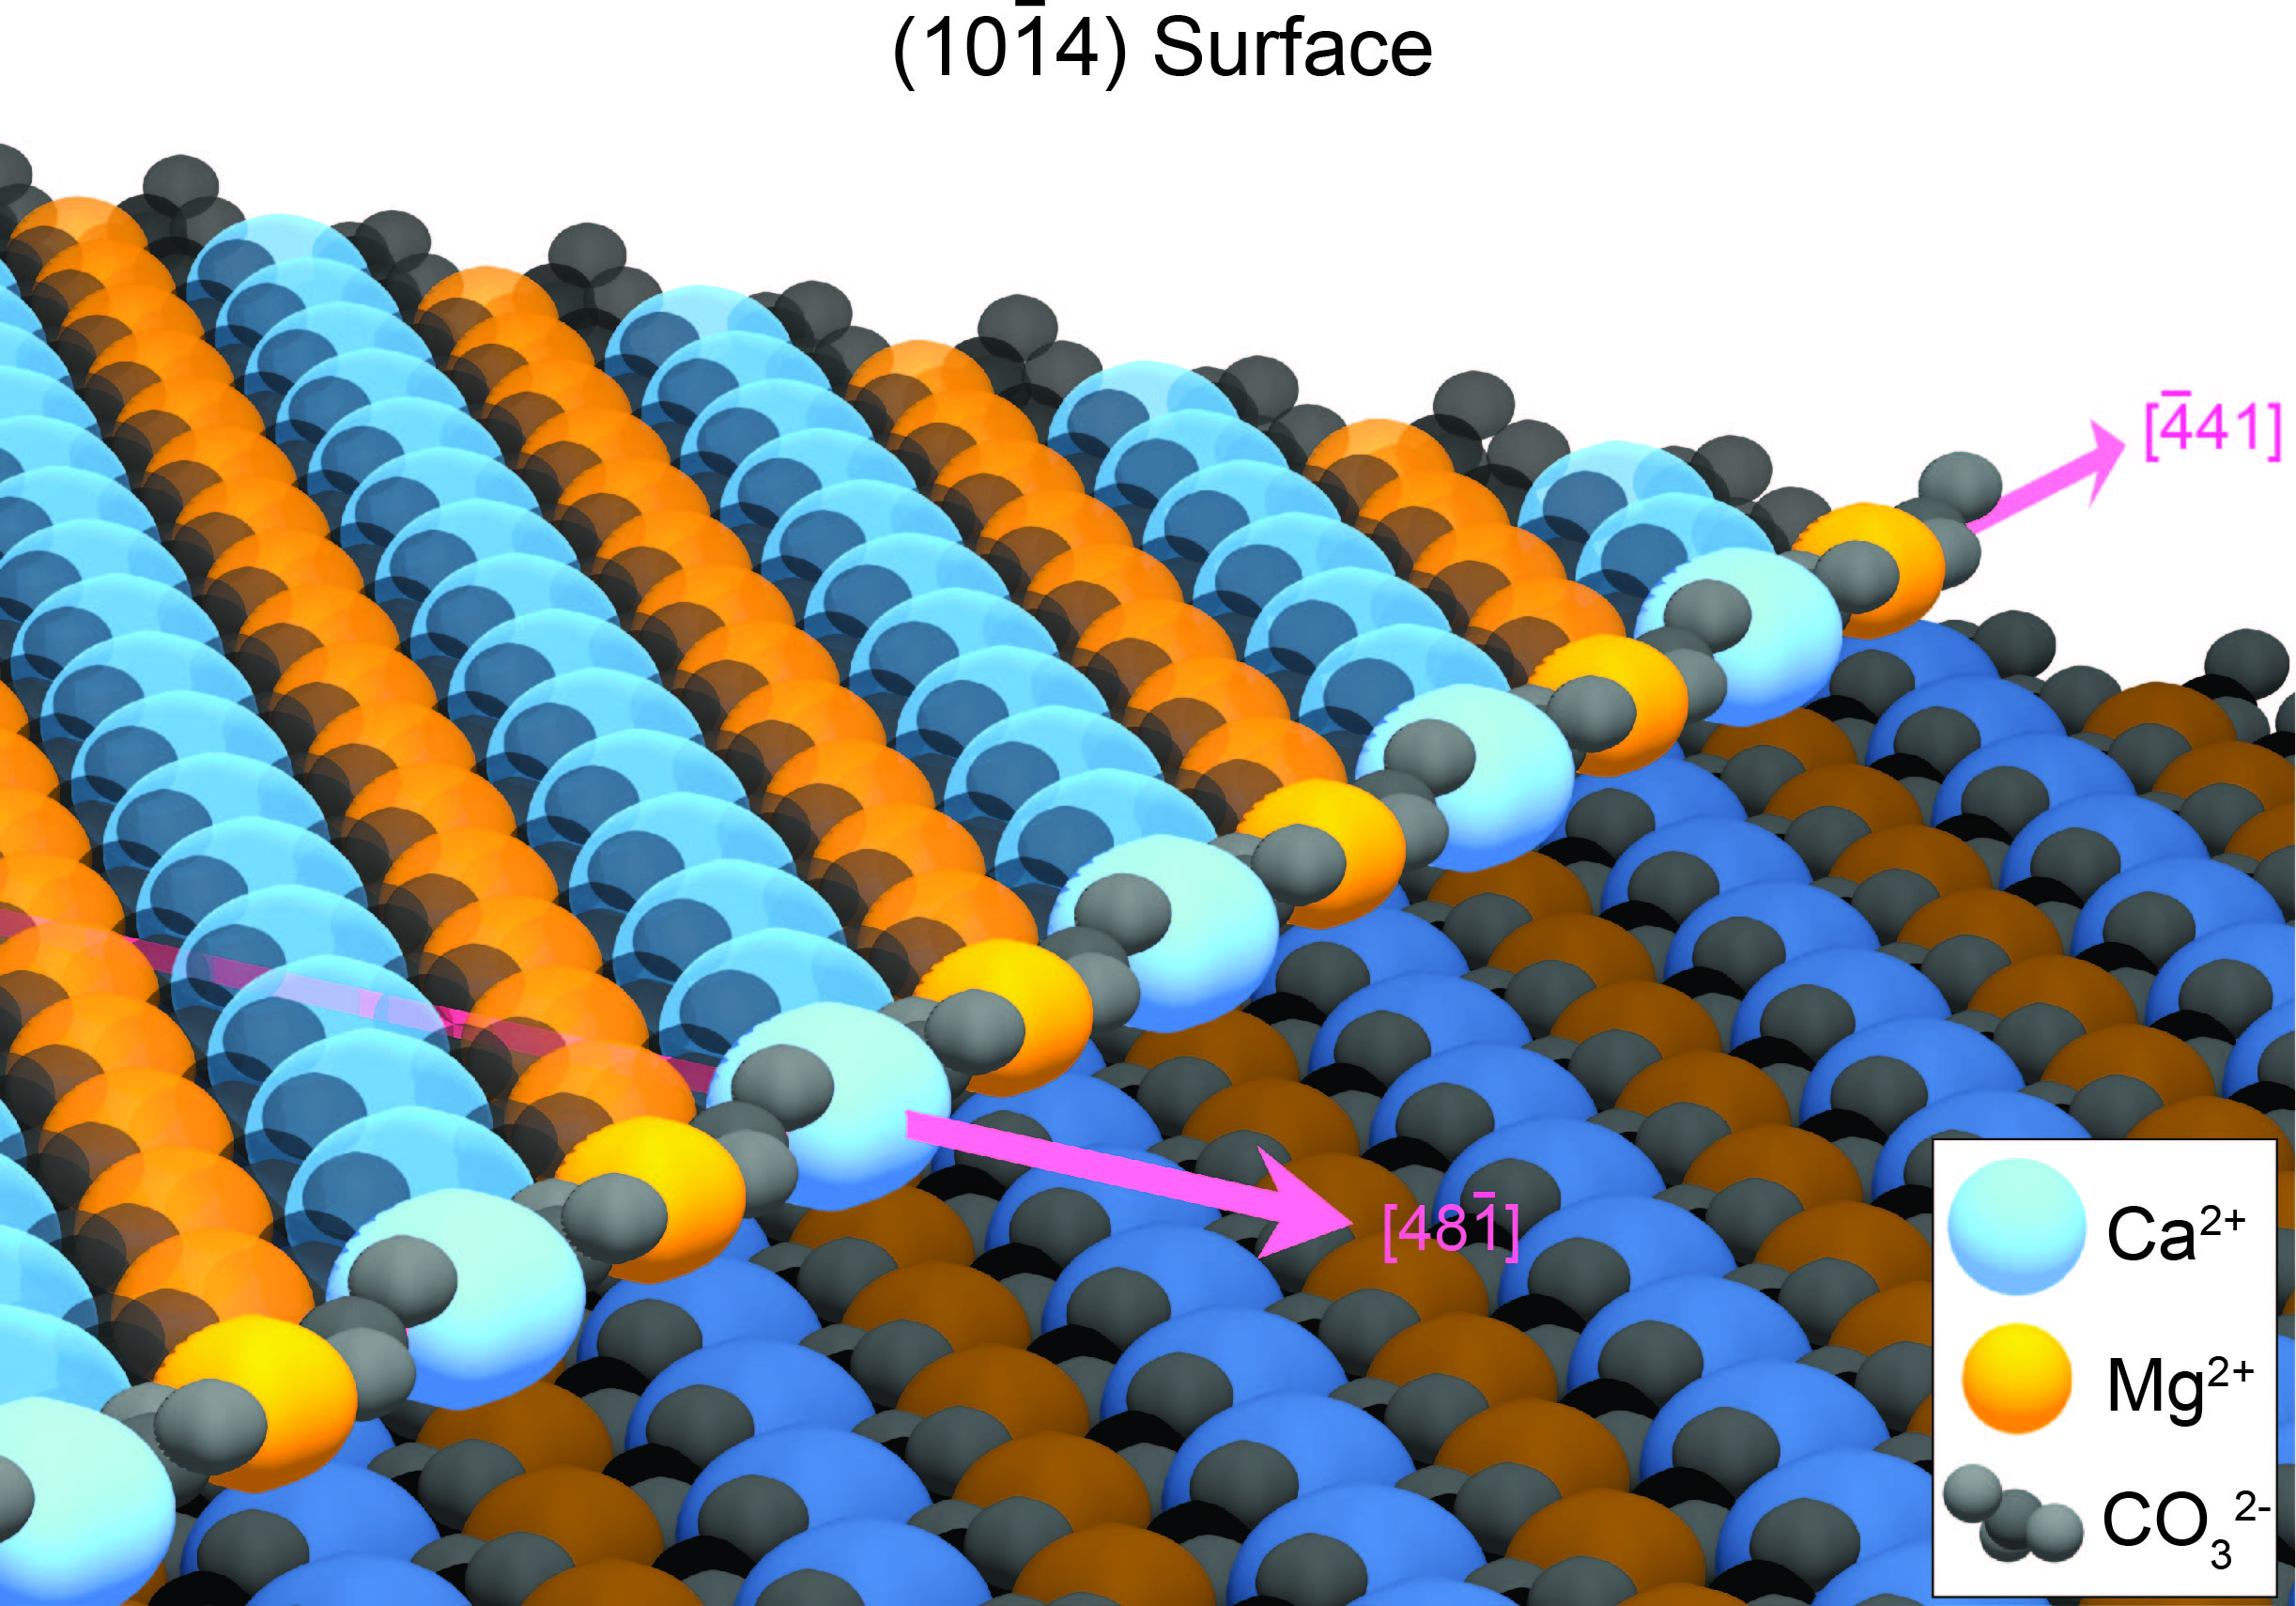 A layer of perfectly alternating and diagonal rows of blue and orange spheres are interspaces with rows of black spheres. Another identical layer of spheres sits below the first, and is visible on the right-hand side of the top layer, which is incomplete. The spheres represent the constituent atoms that comprise a dolomite crystal.